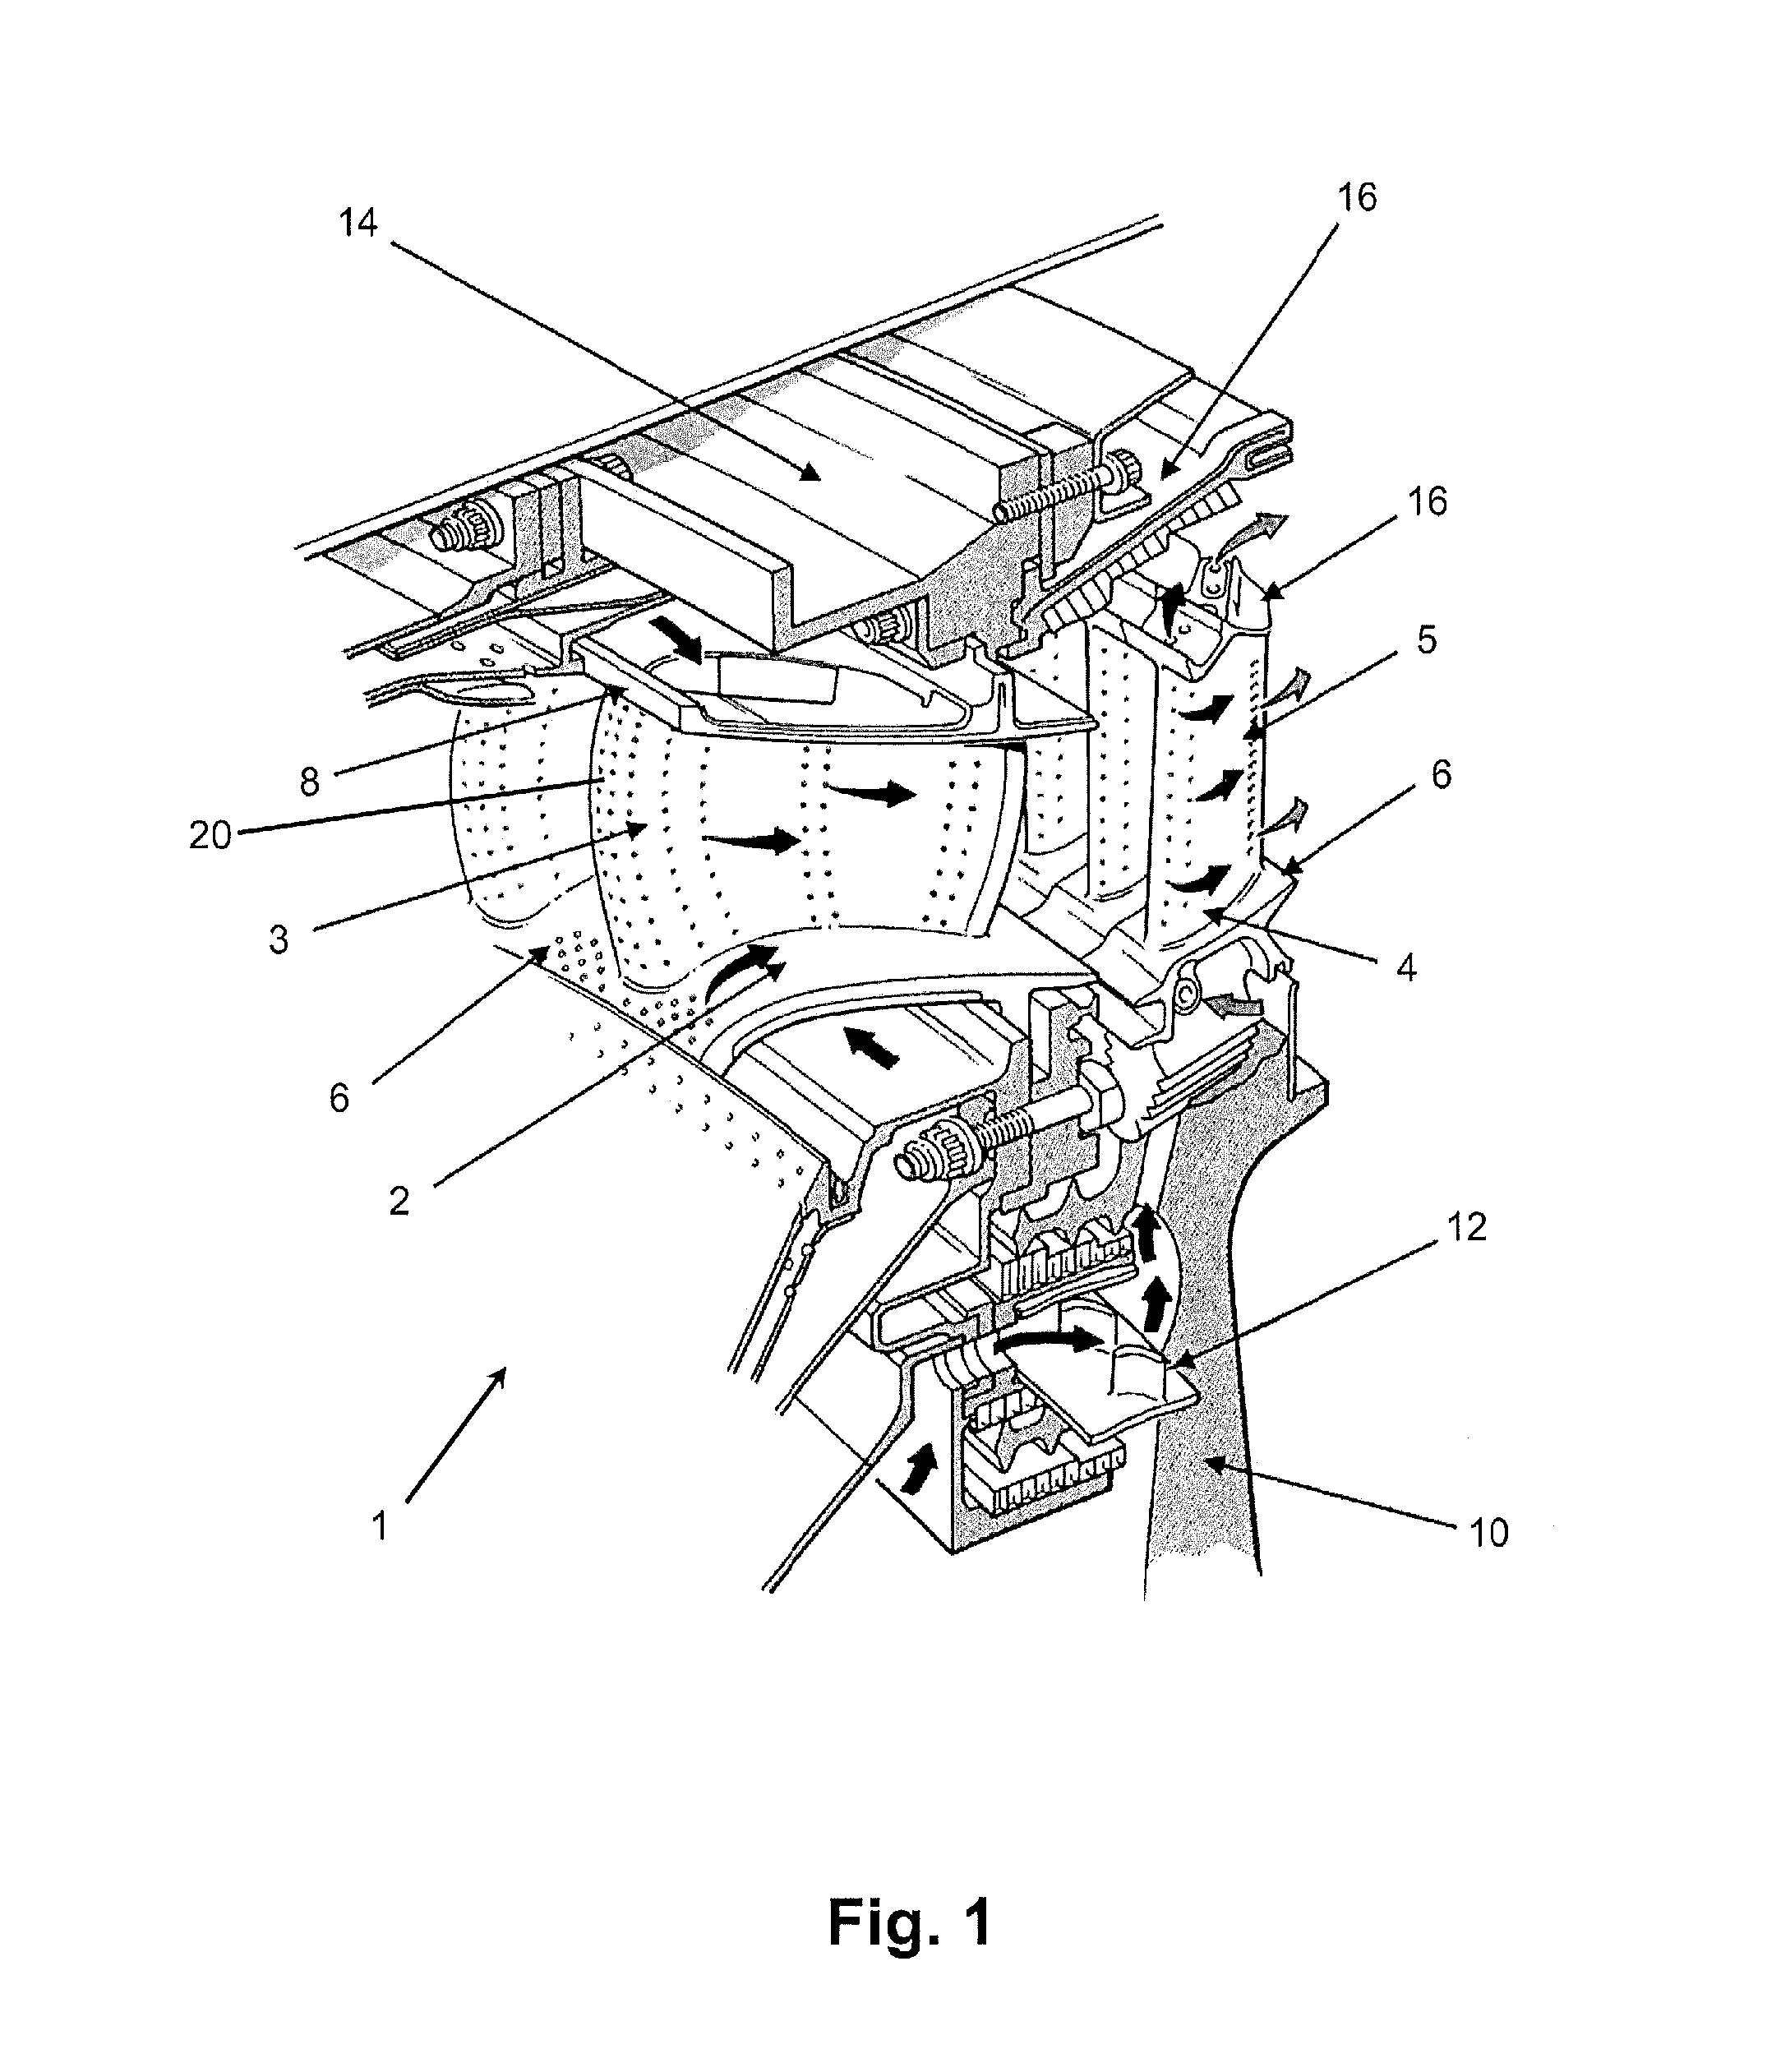 Internal cooling of engine components